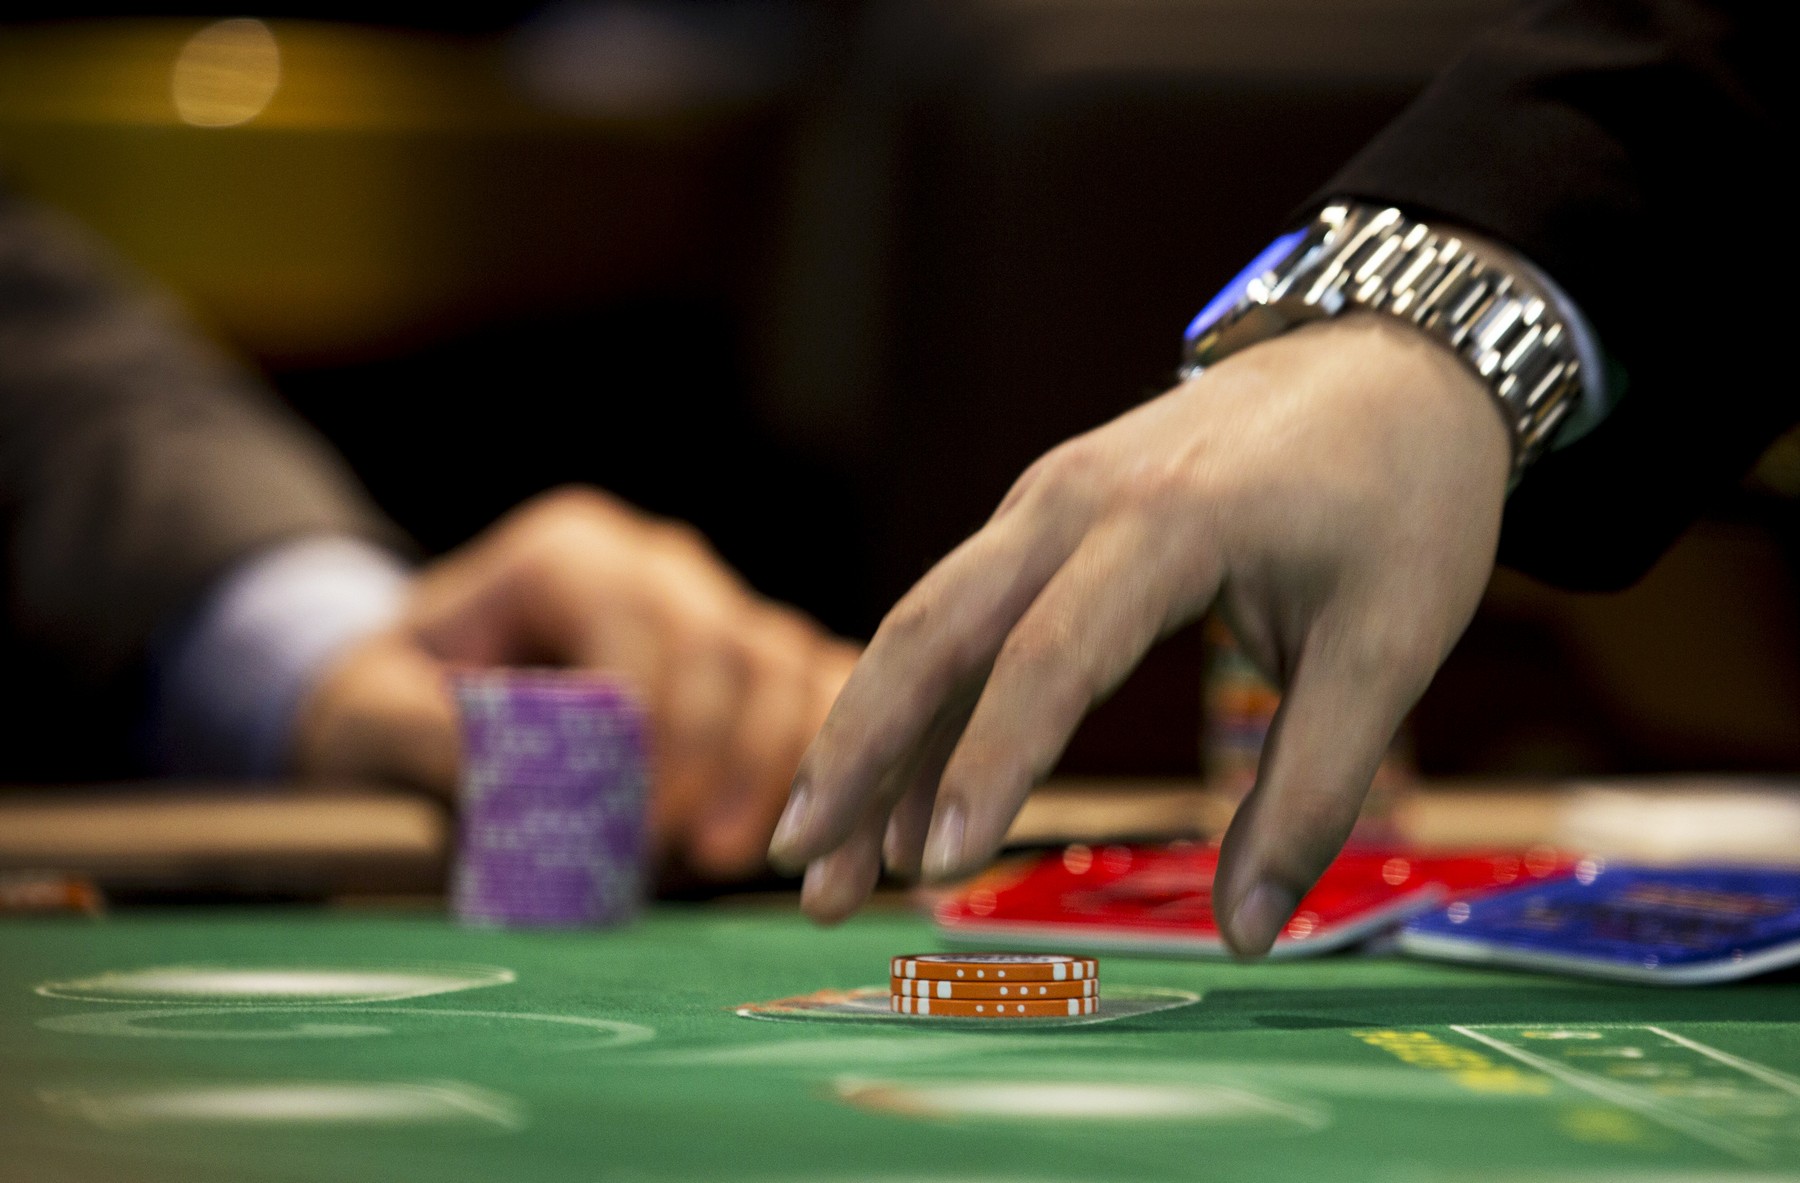 Macau government contemplates banning dealers from gambling in casinos